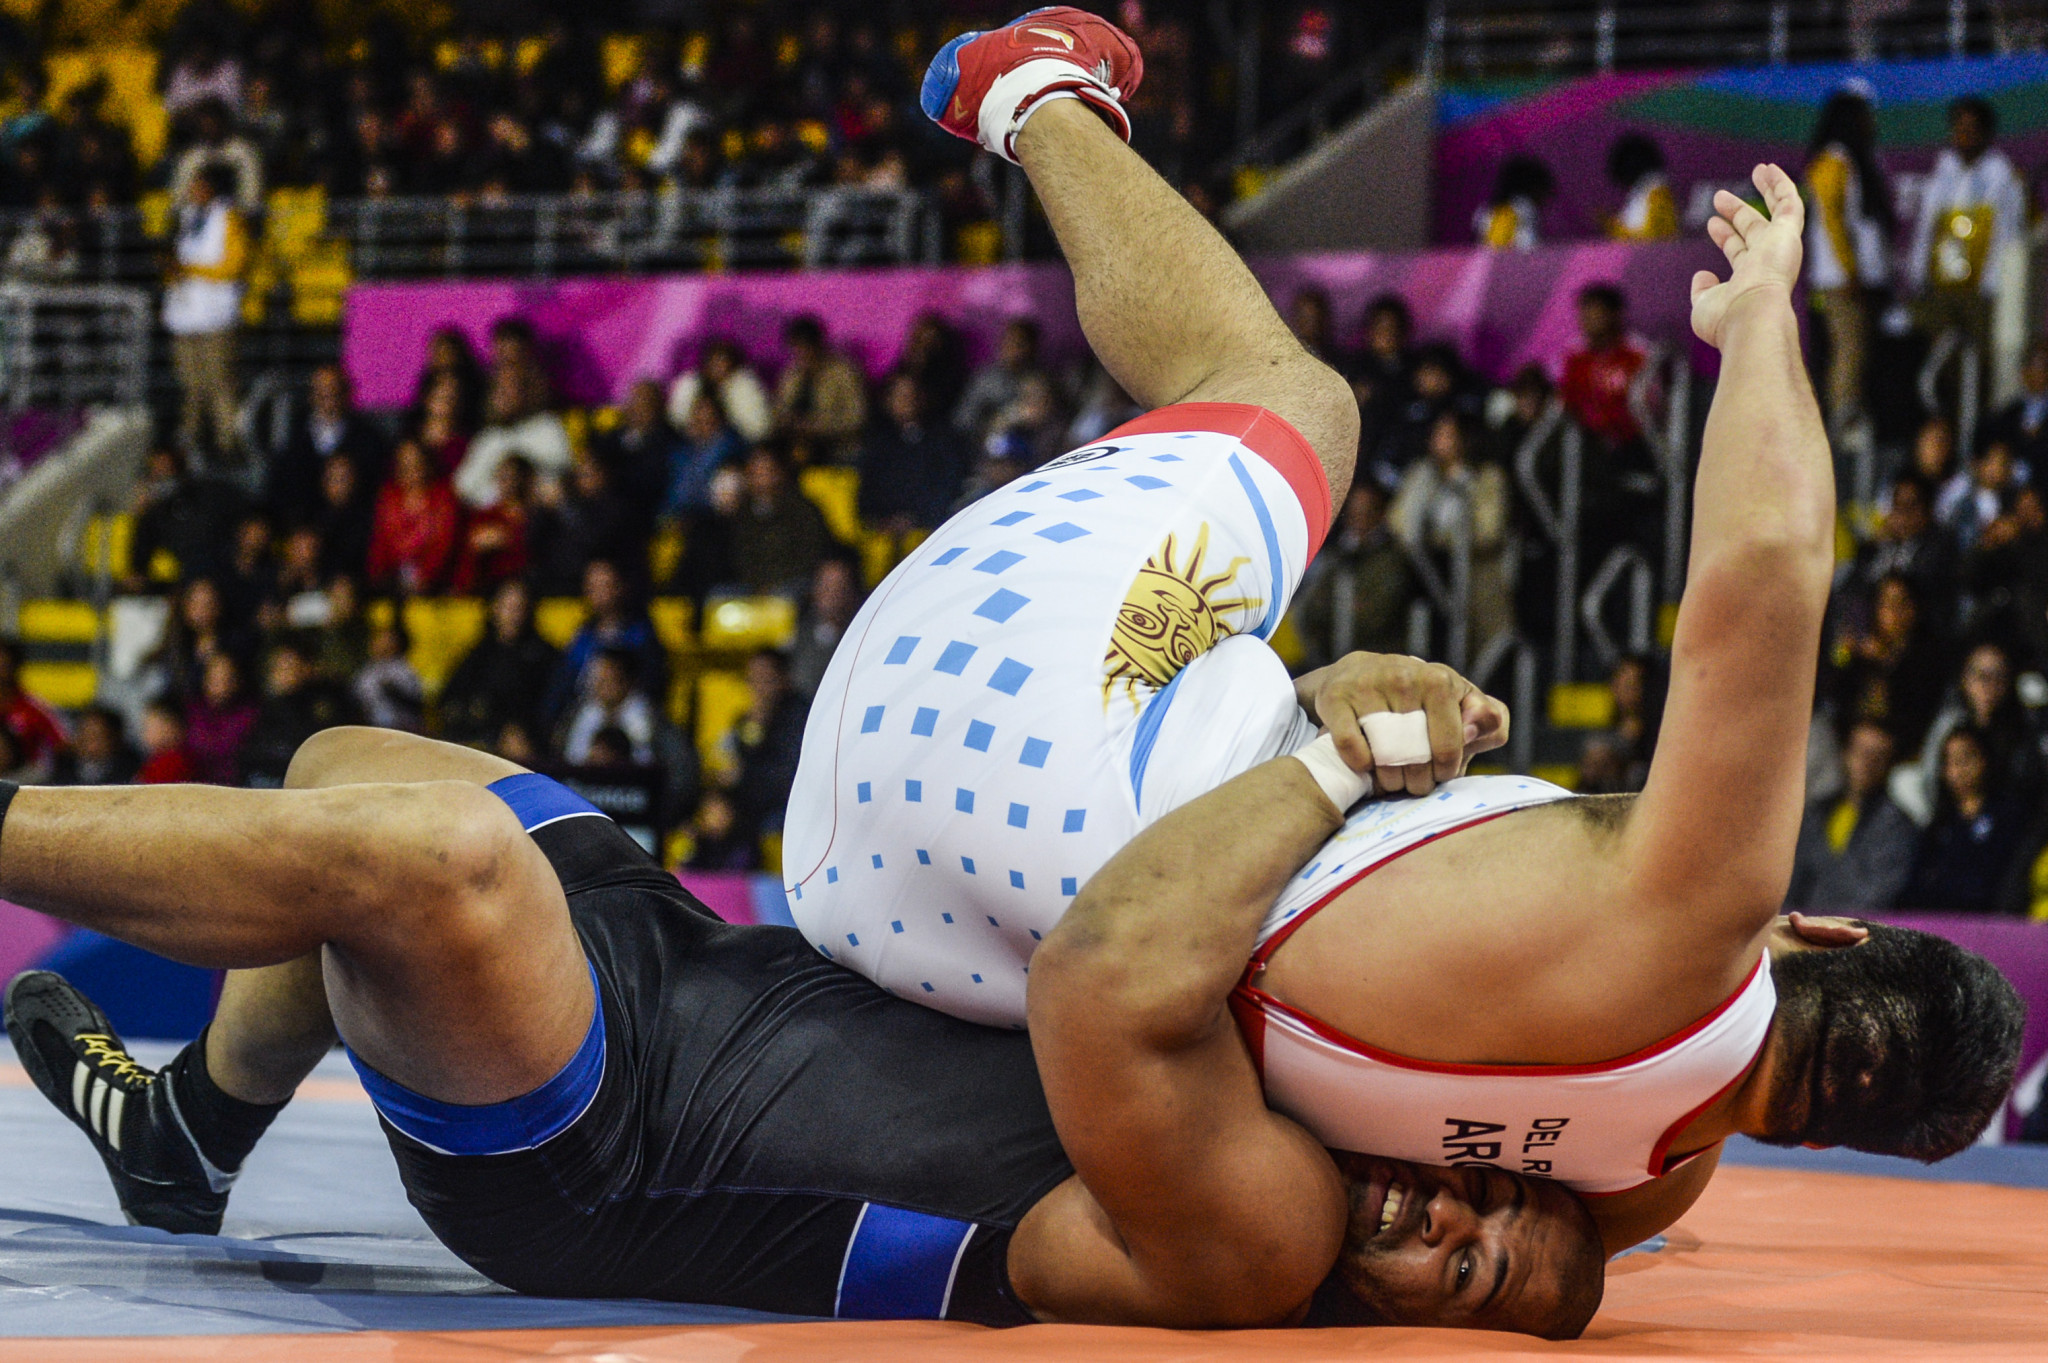 Pan American Wrestling Championships moved from Rio to Guatemala City